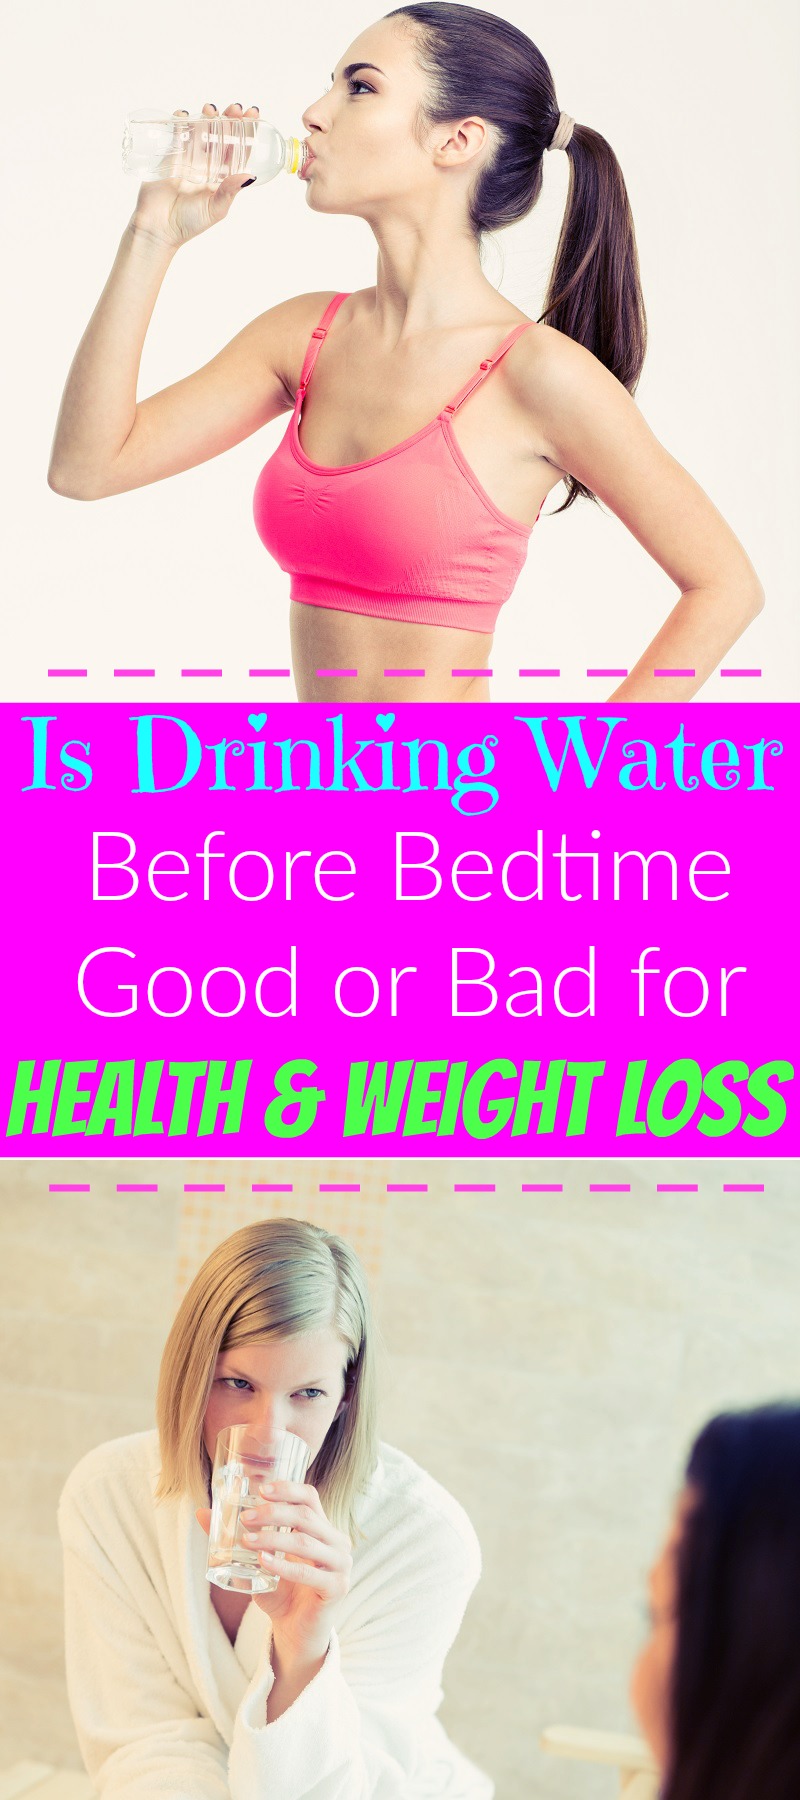 Is Drinking Water Before Bed Good or Bad for Health and Weight Loss